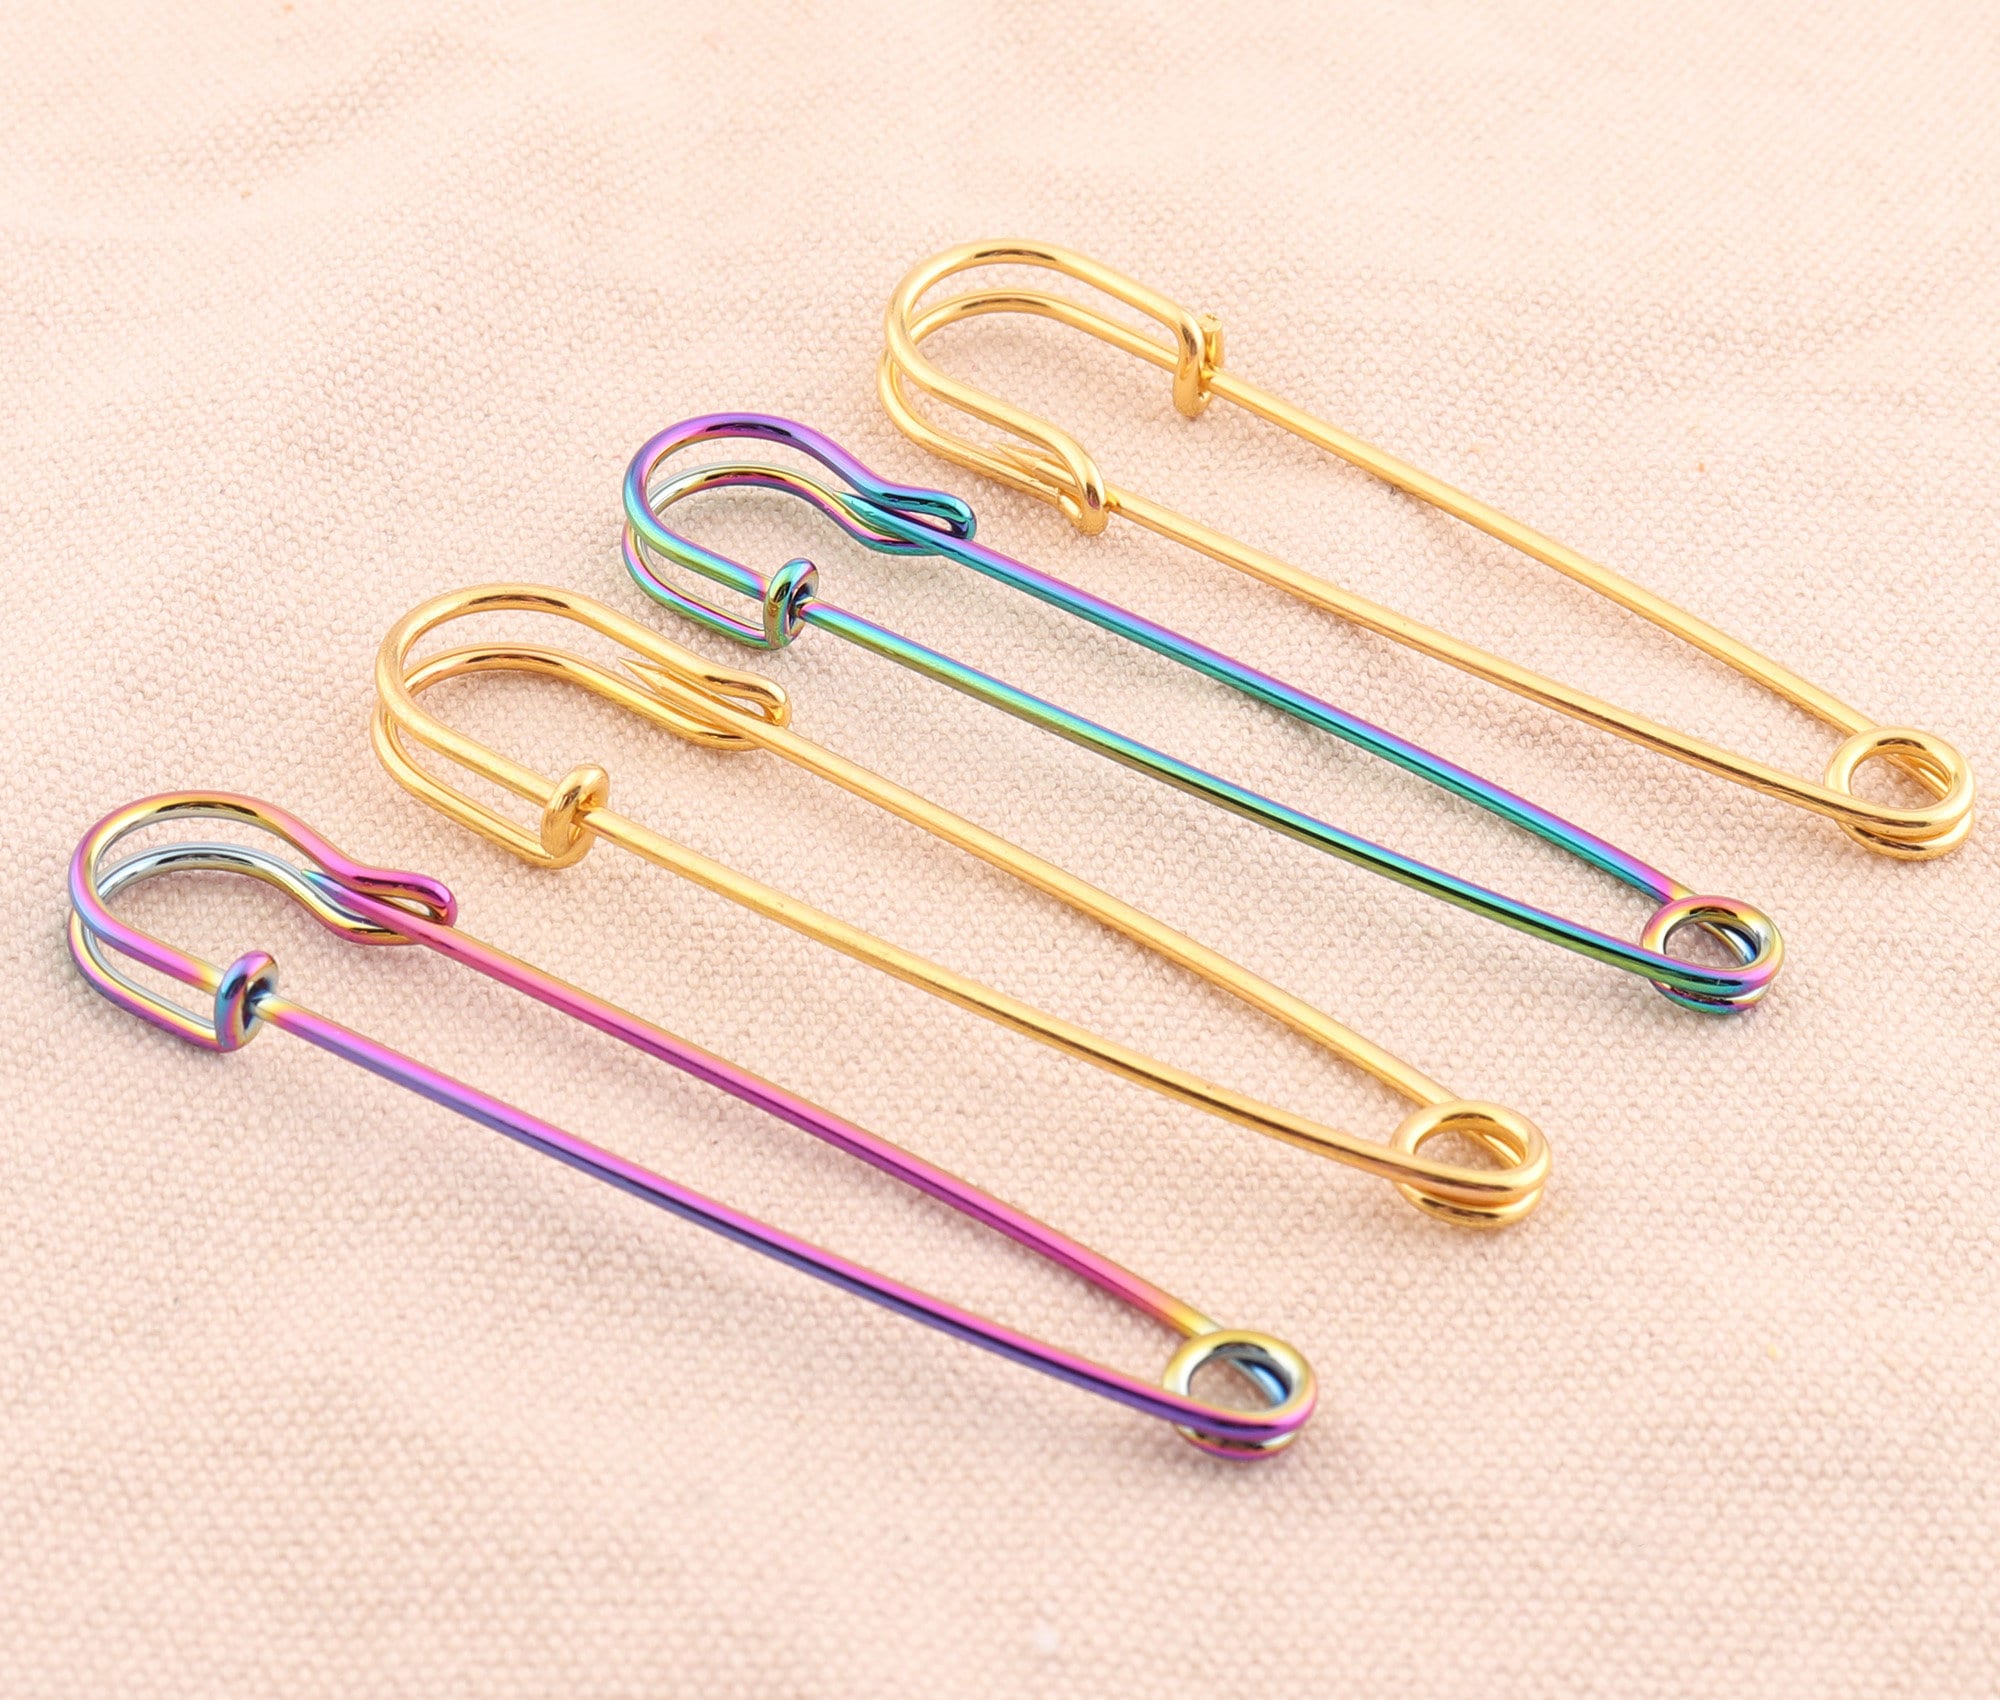 10032mm Mega Giant Safety Pin Brooch Deluxe Kilt Scarf Pin,1.2 Inch  Gold/rose Gold Charming Shawl Pins Large Sewing Safety Pins Supply 